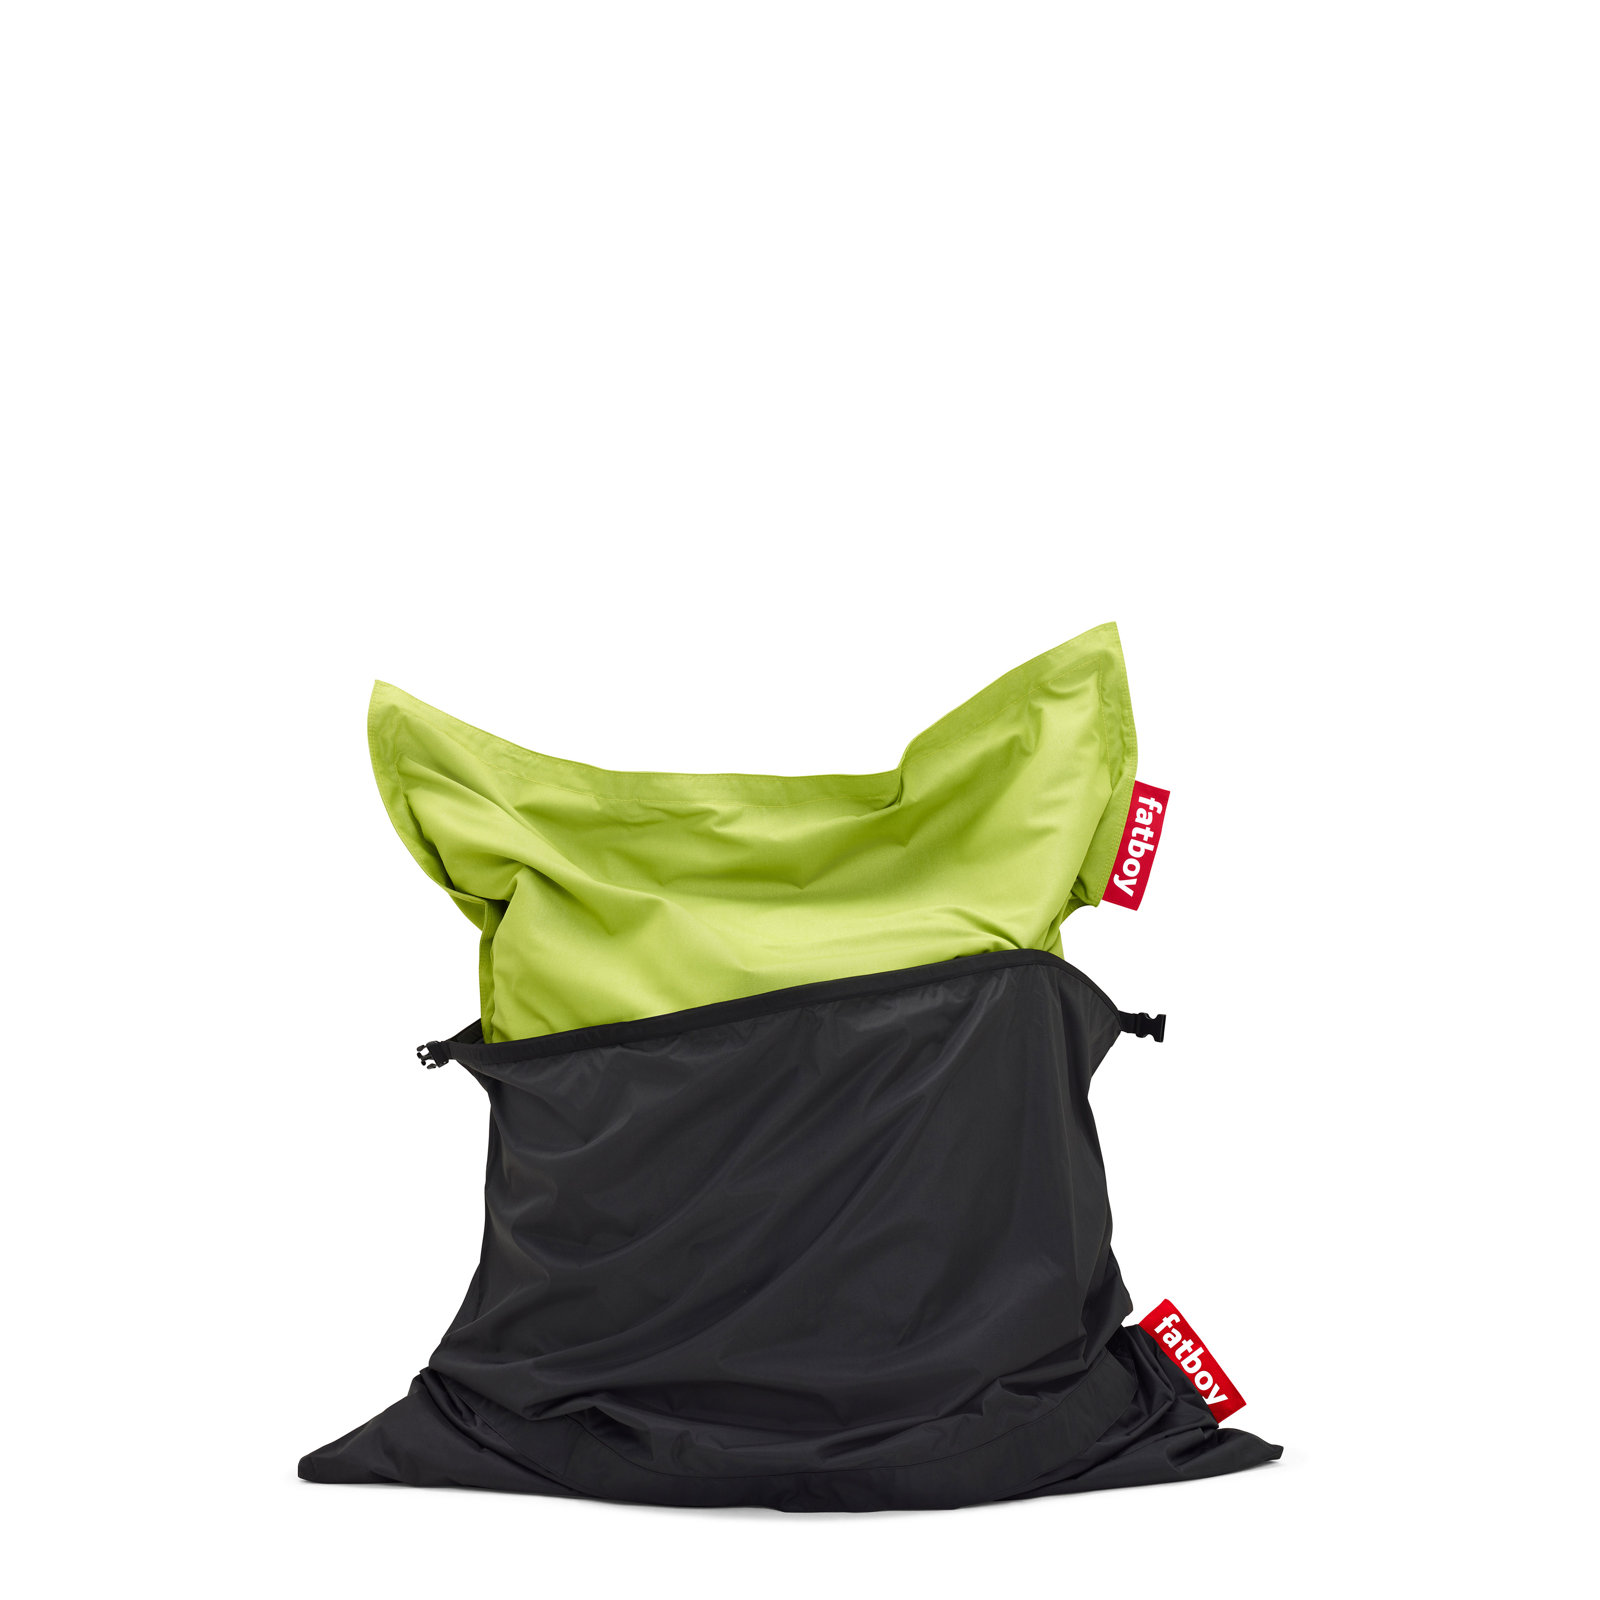 Fatboy Large Outdoor Bean Bag Cover